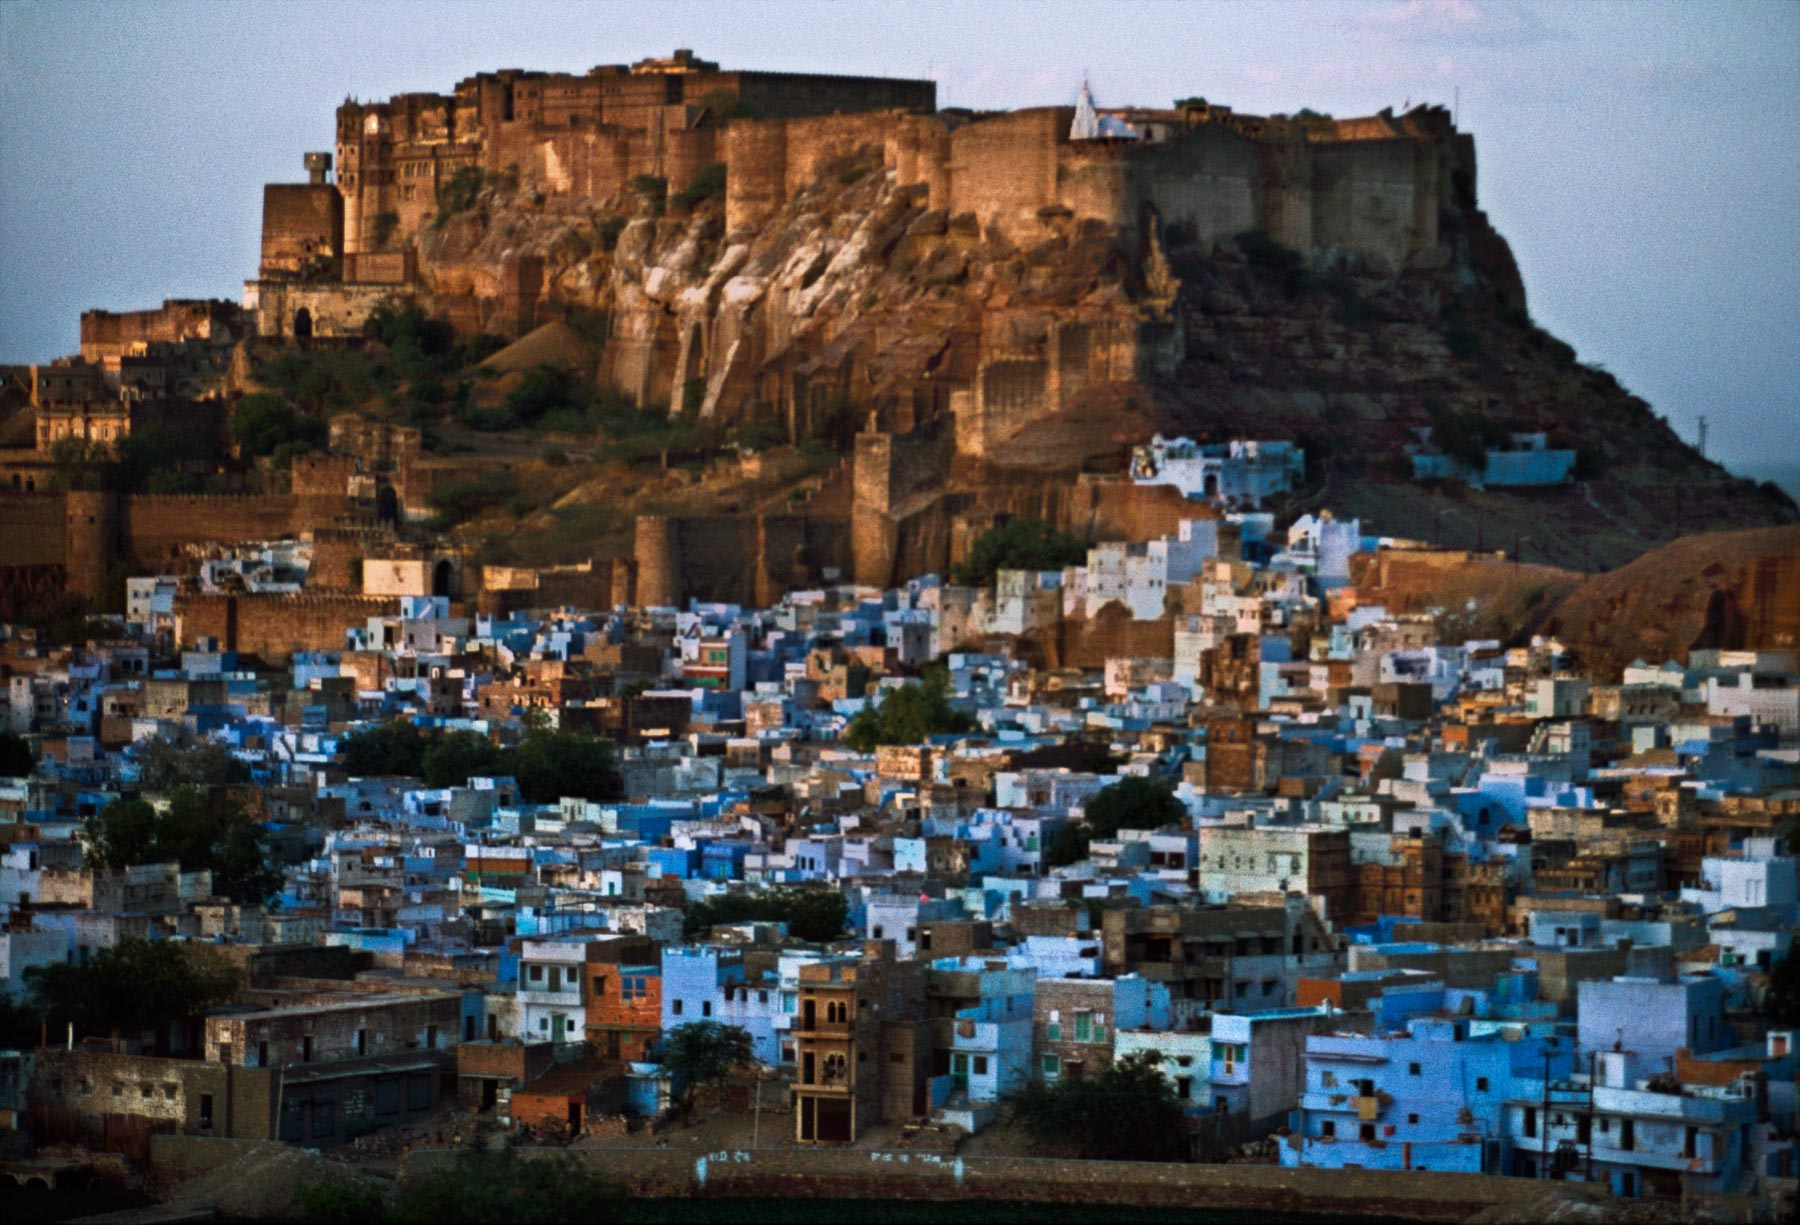 What is Jodhpur famous for? : Namaste!